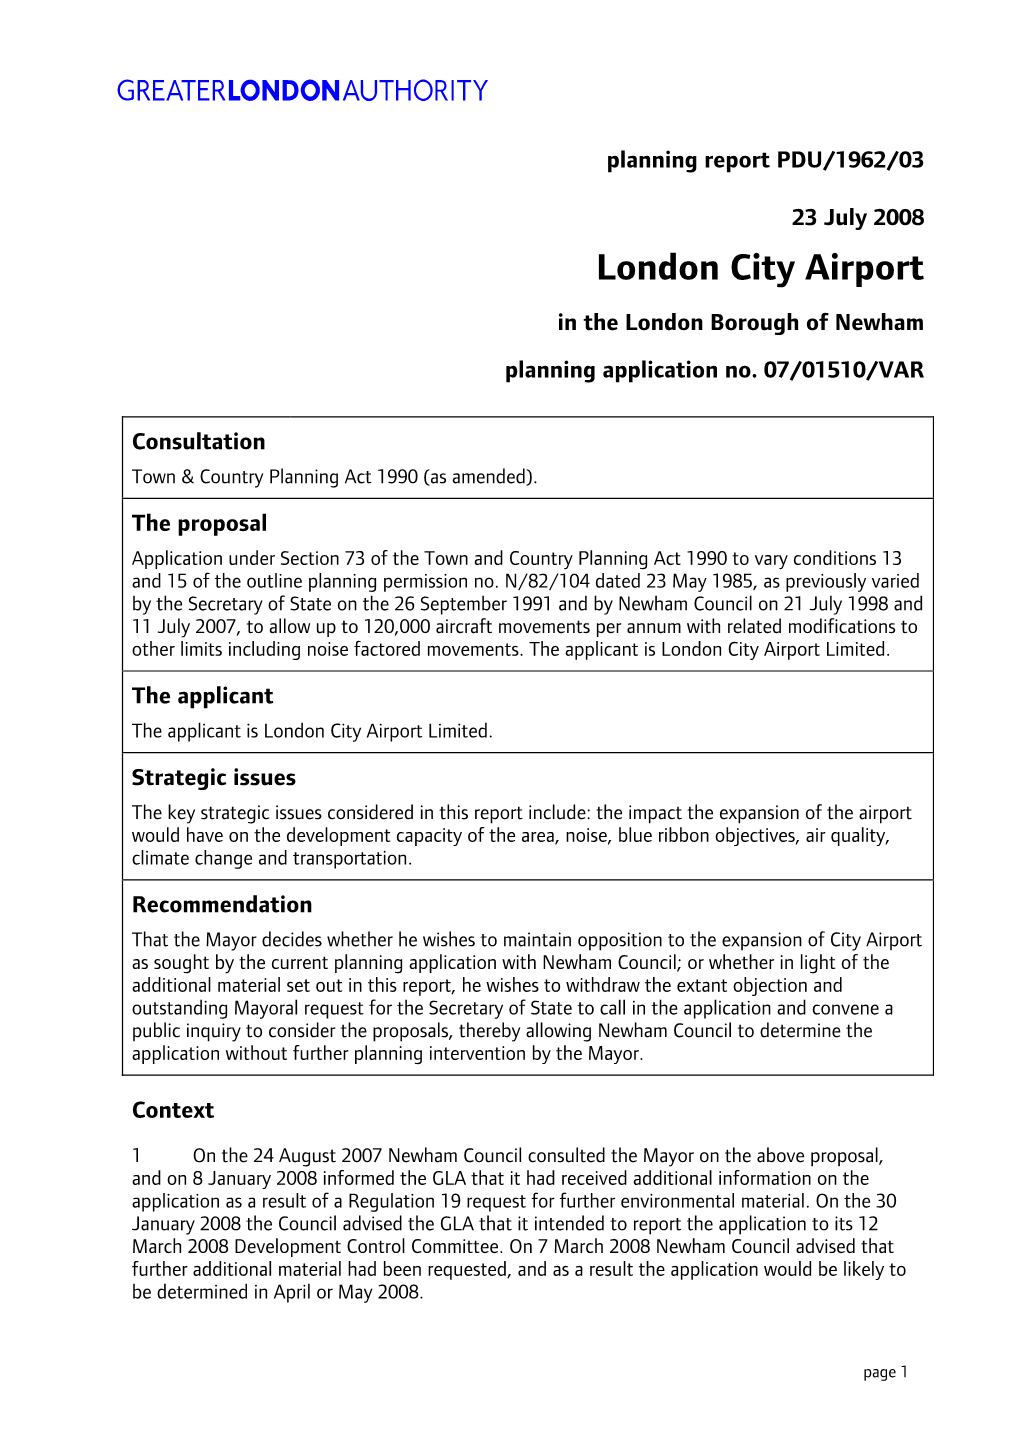 London City Airport in the London Borough of Newham Planning Application No